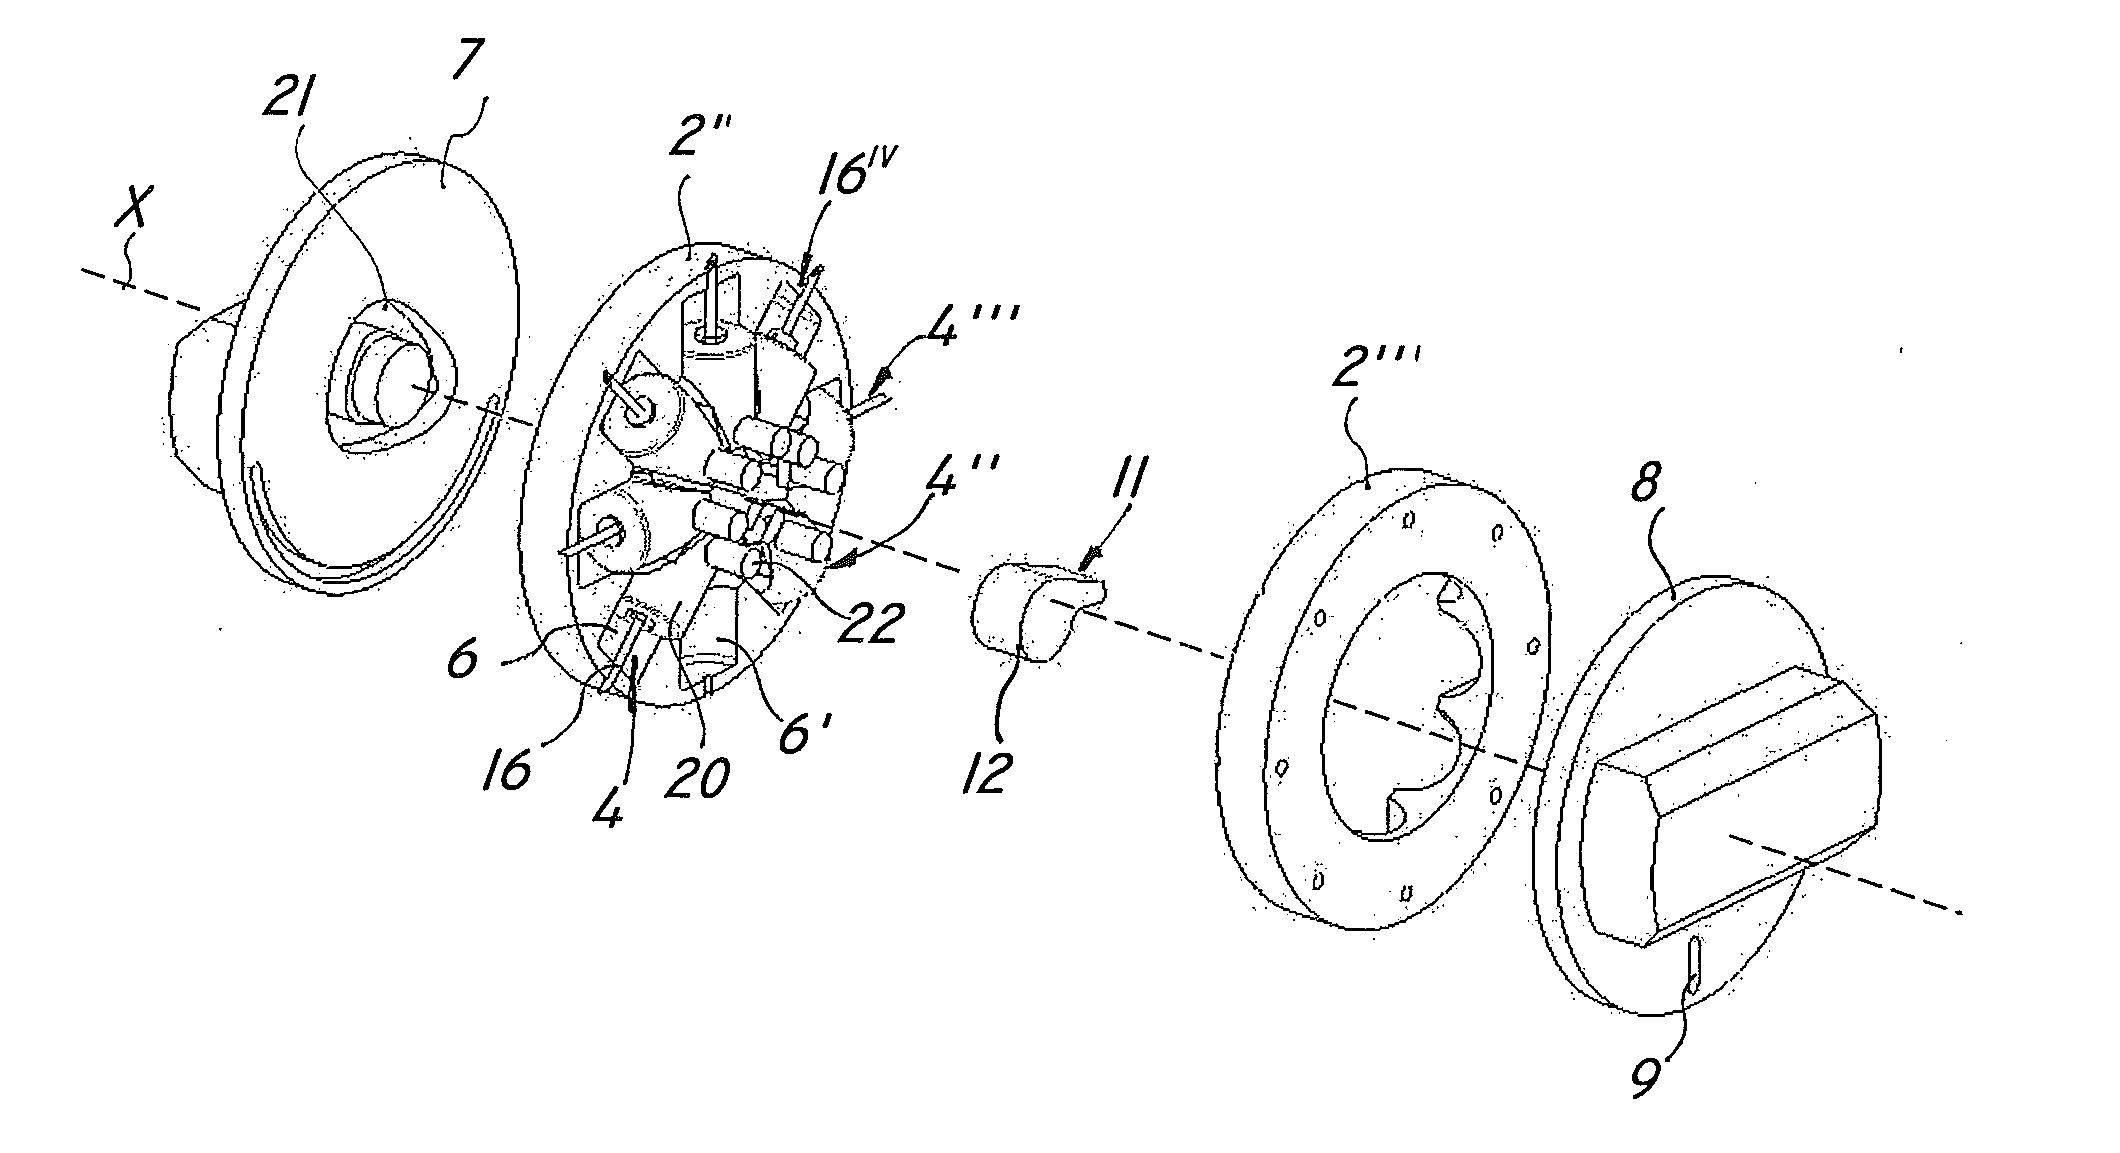 Multiple-injection medical apparatus